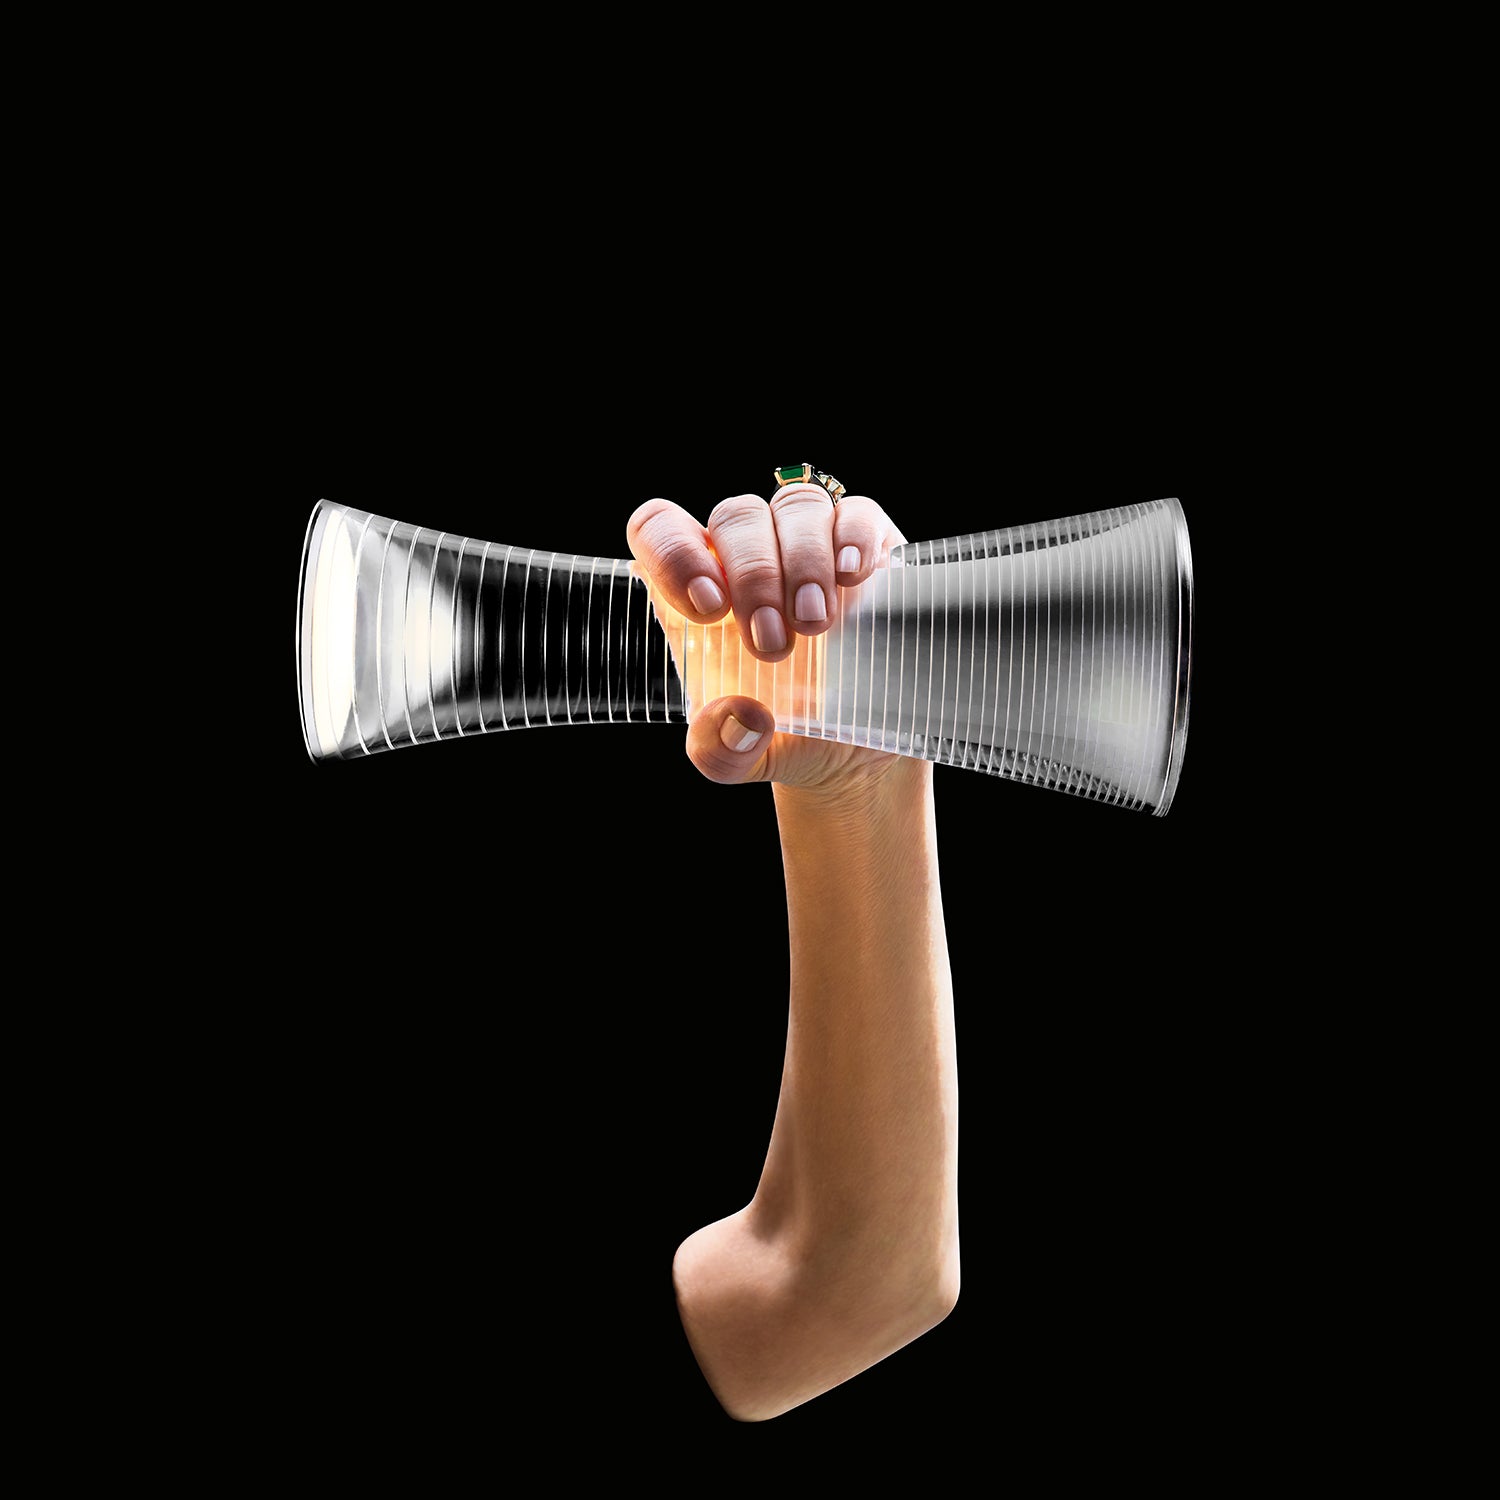 Artemide Come Together Portable Lamp Ambience image showing a hand holding the lamp